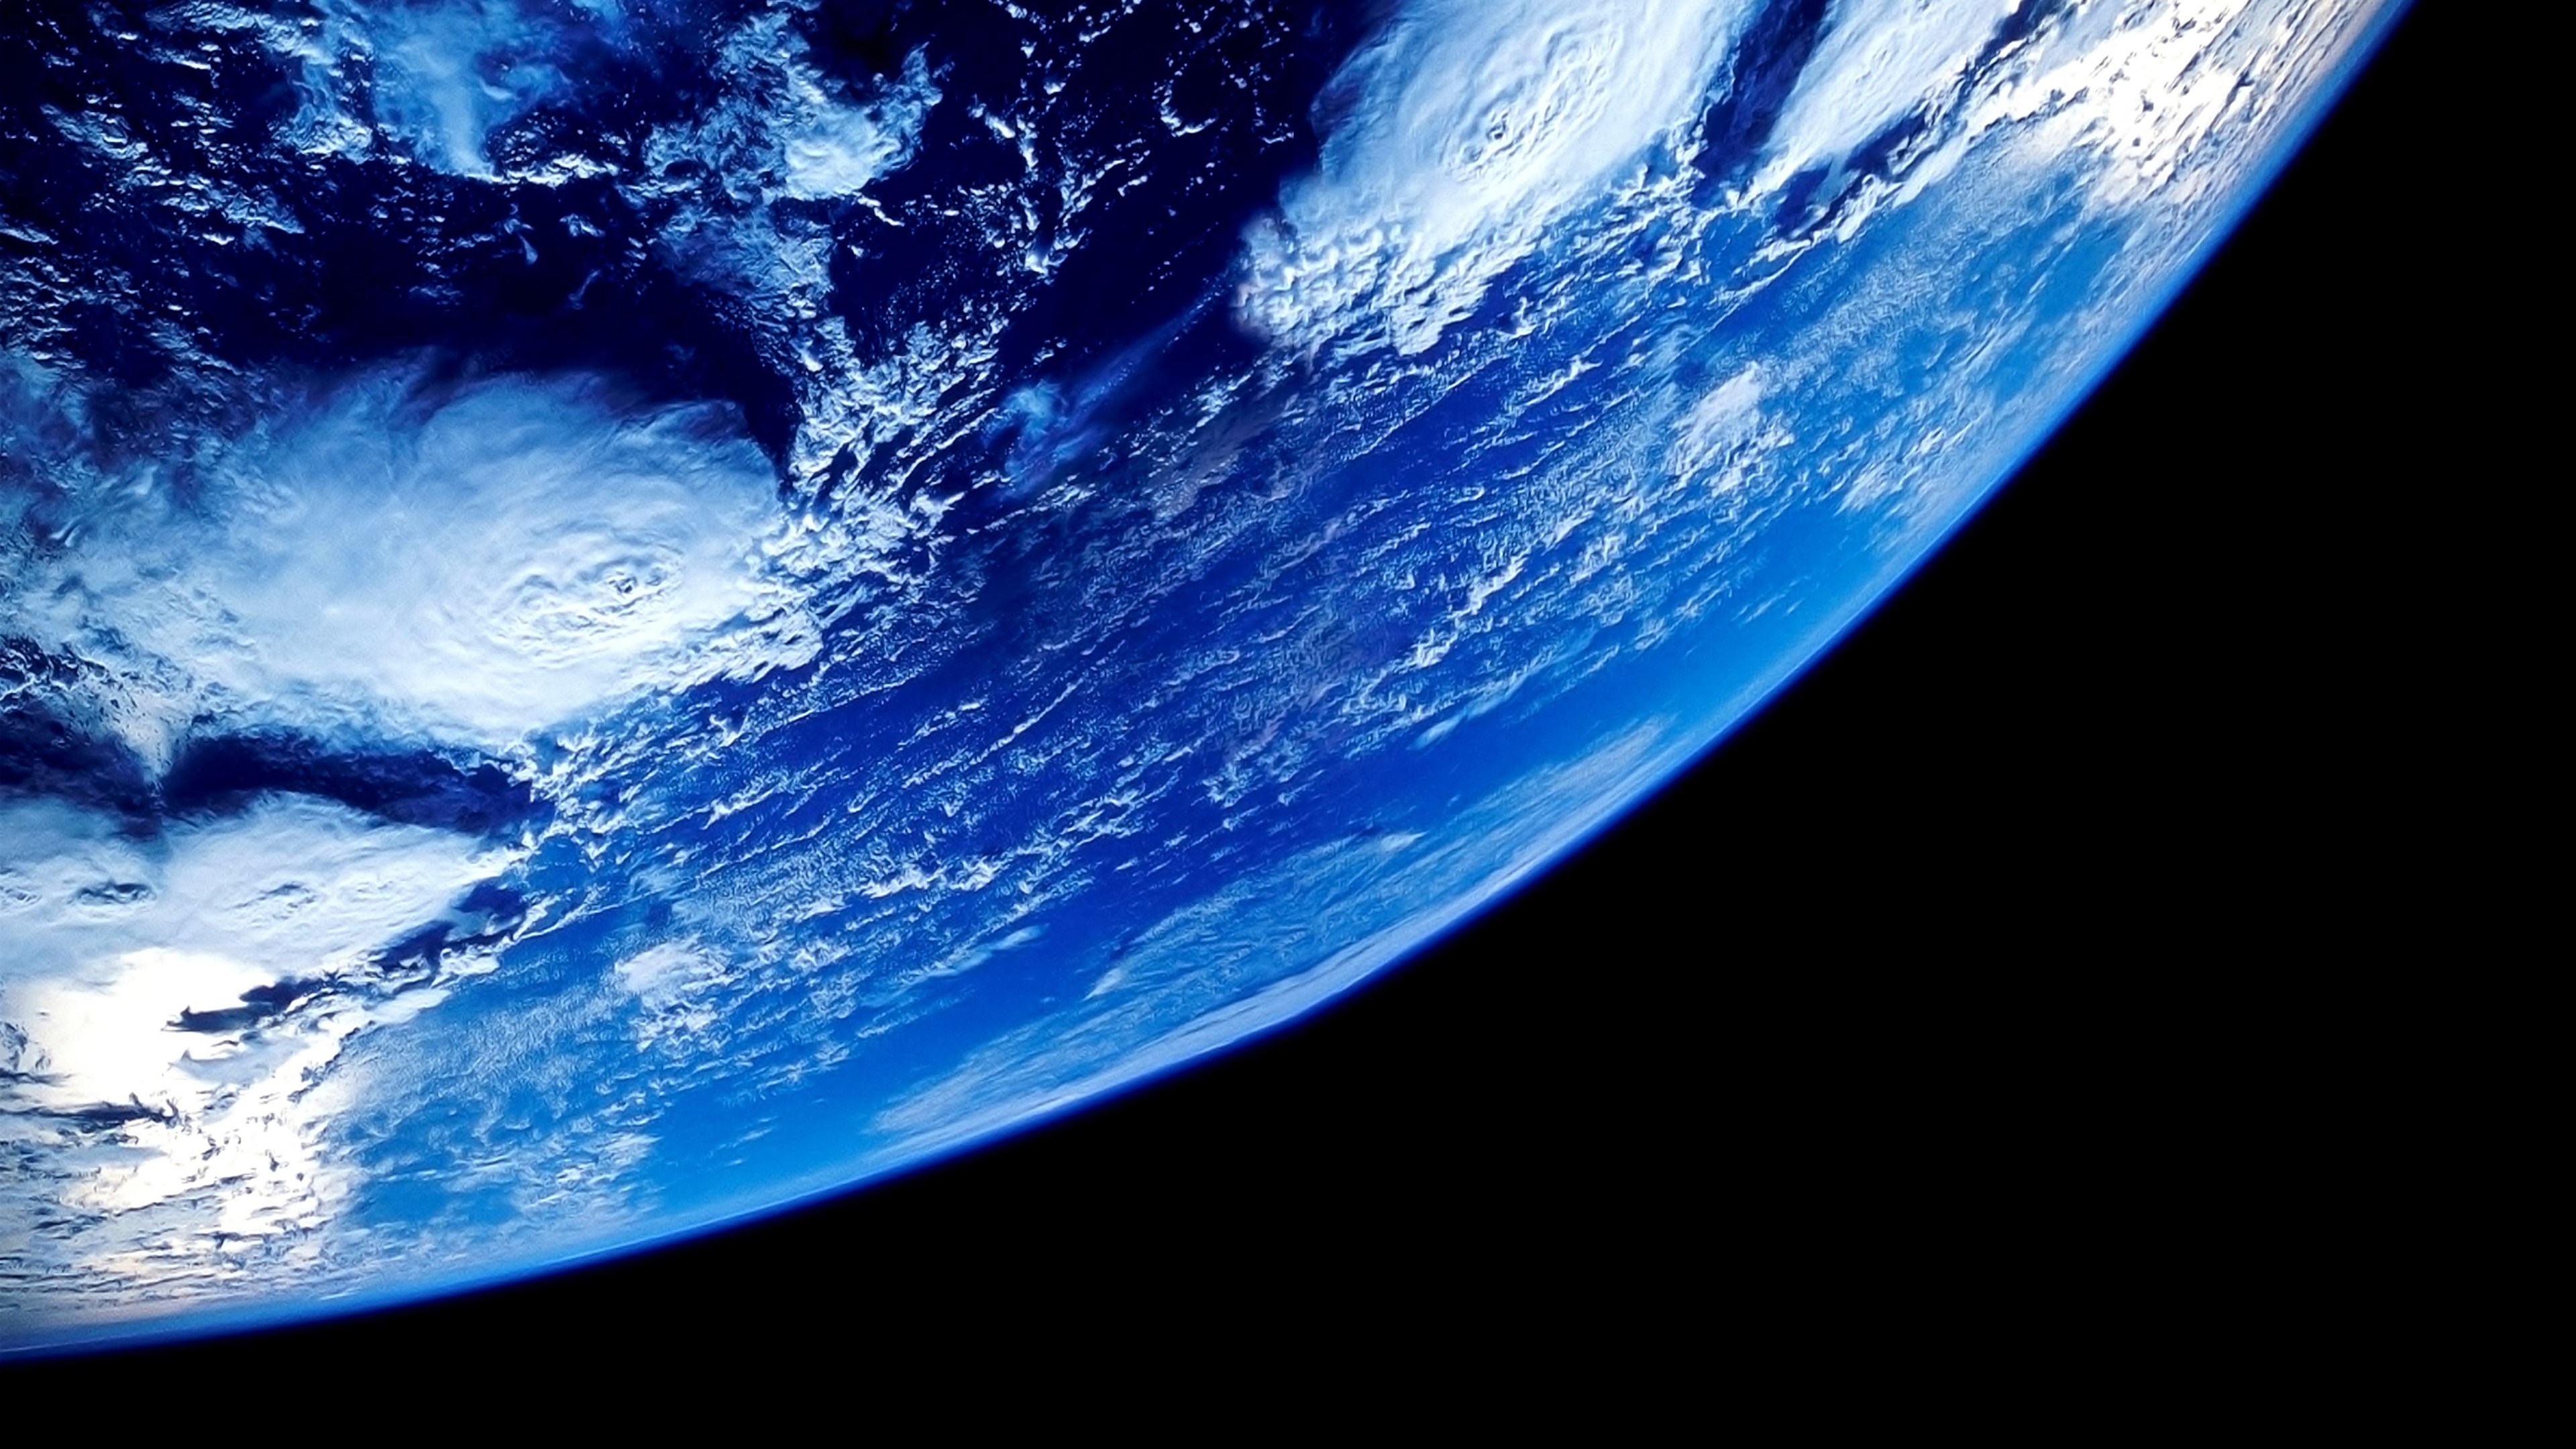 From space hd papers and backgrounds